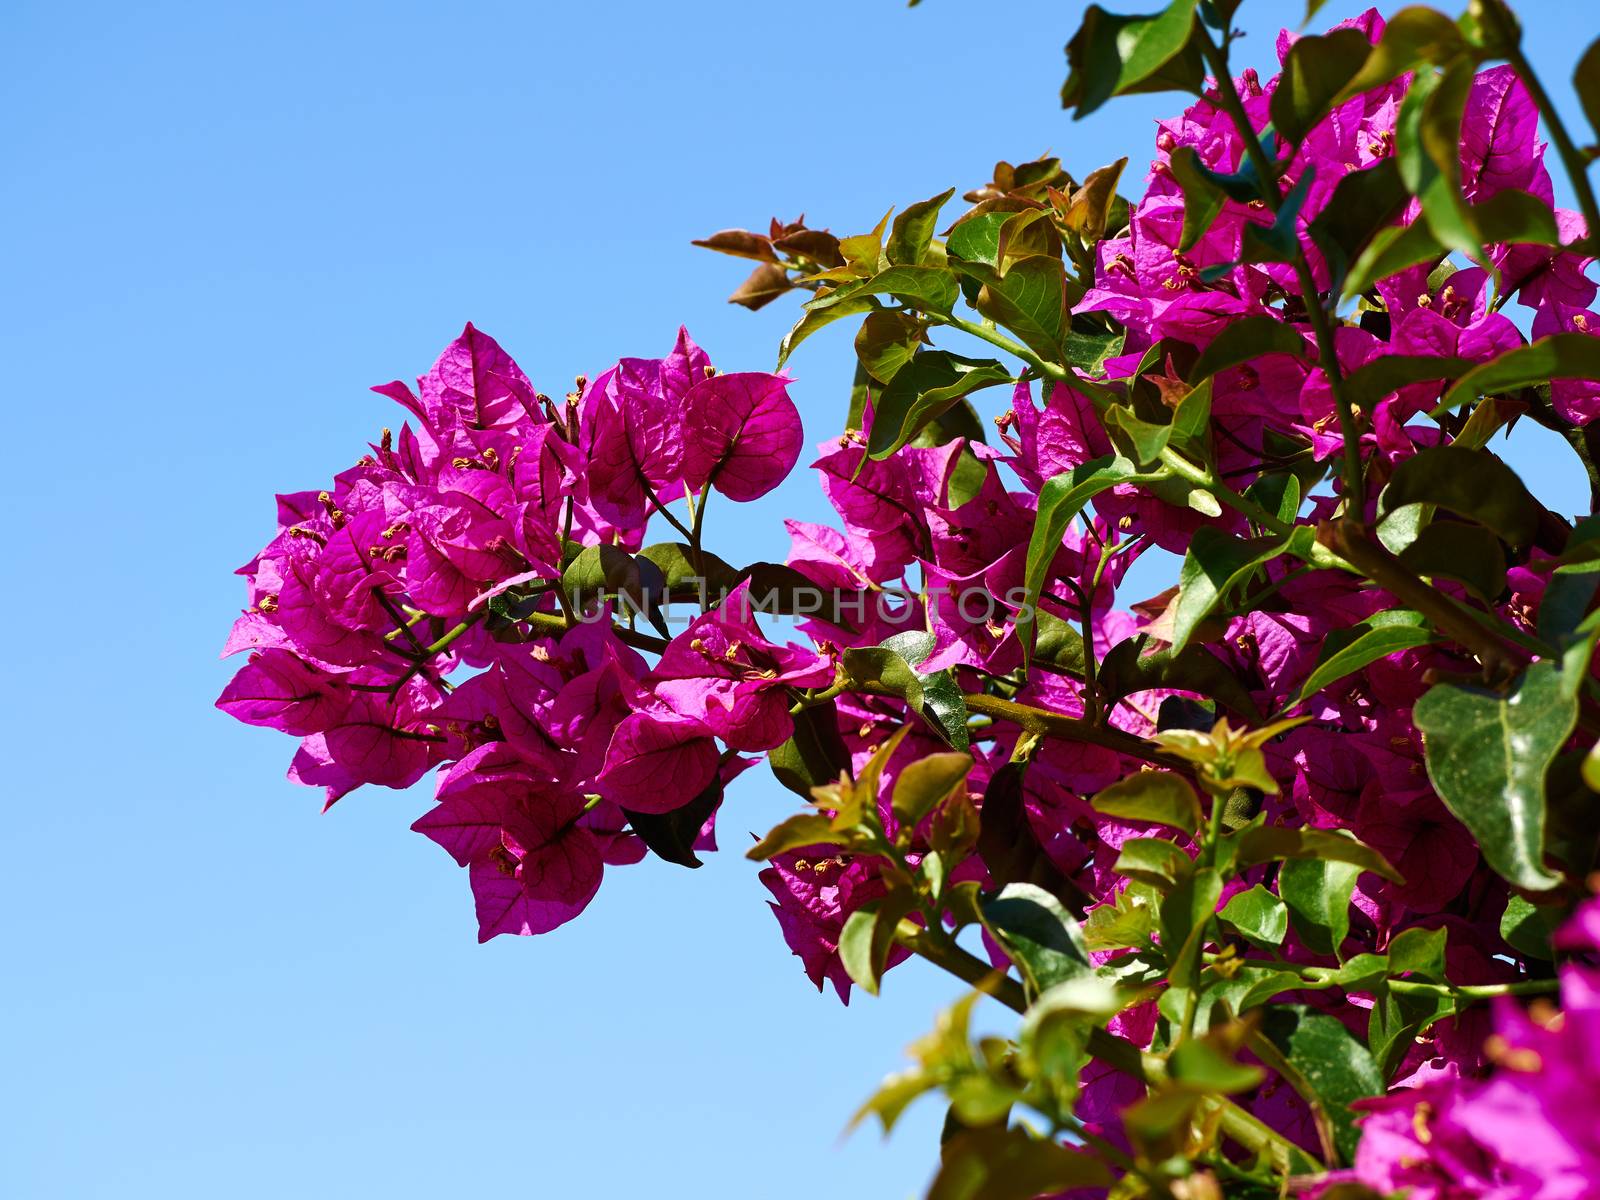 Blooming Bougainvillea Paper flower by Ronyzmbow